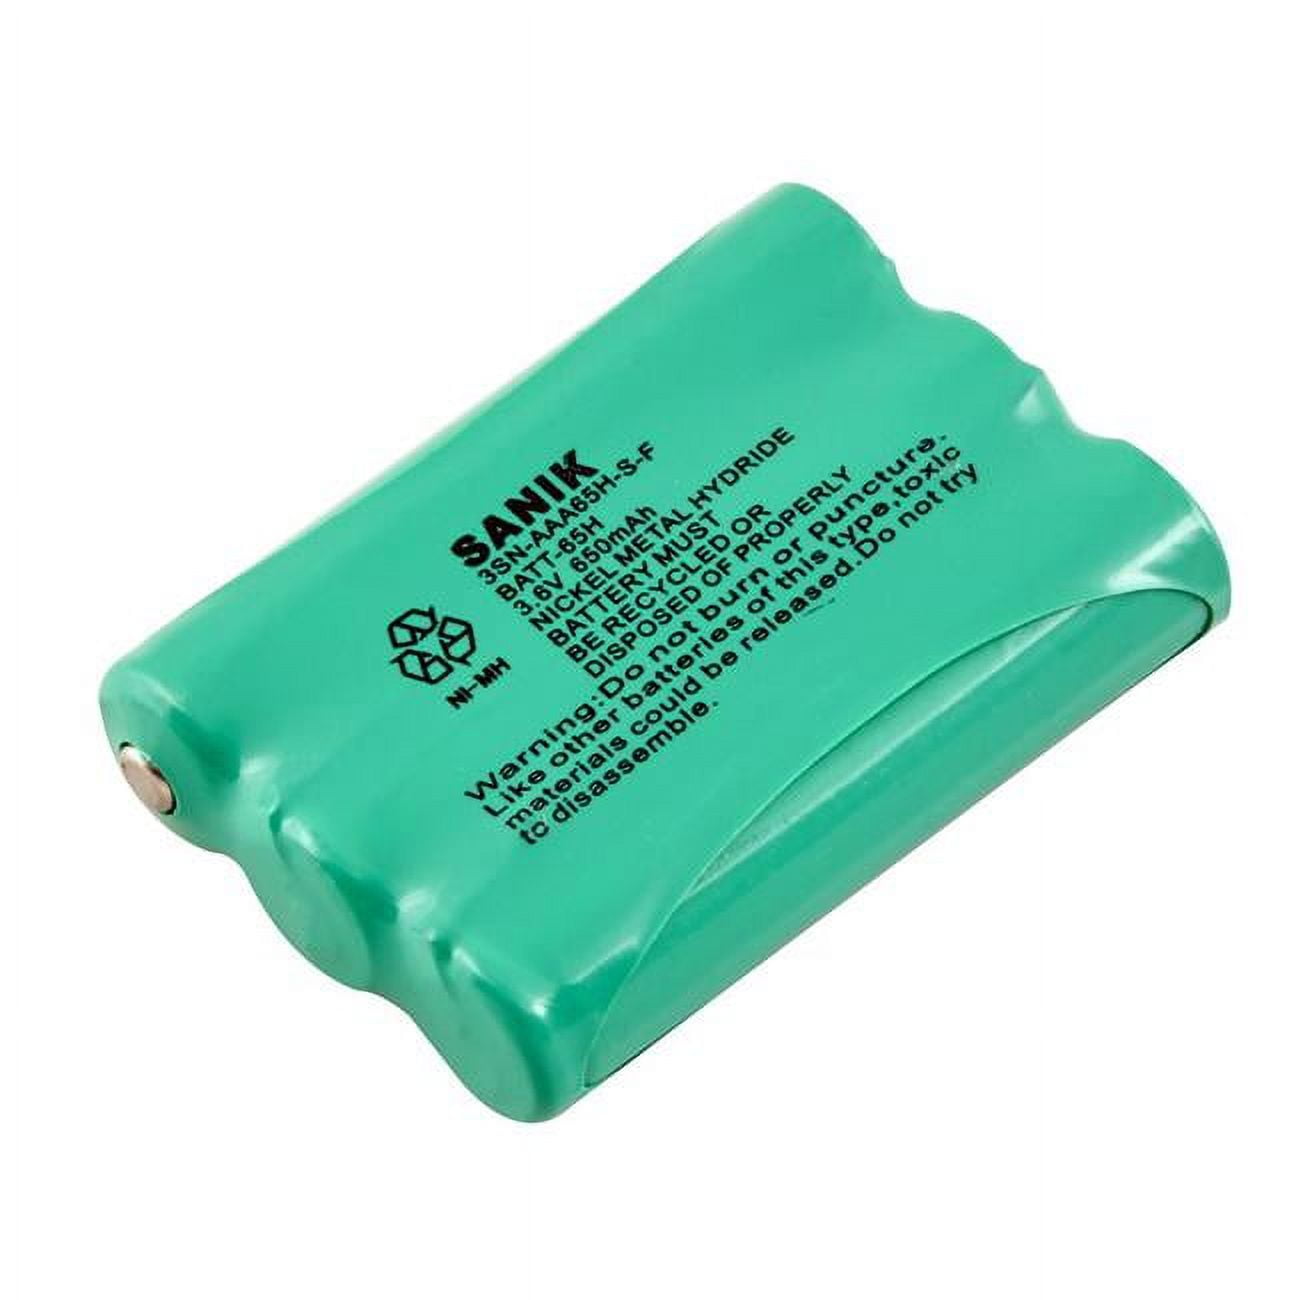 Picture of Ultralast BATT-65H 3.6V & 650 mAh Replacement Nickel Metal Hydride Battery fits forAT&T - 2820 Cordless Phone